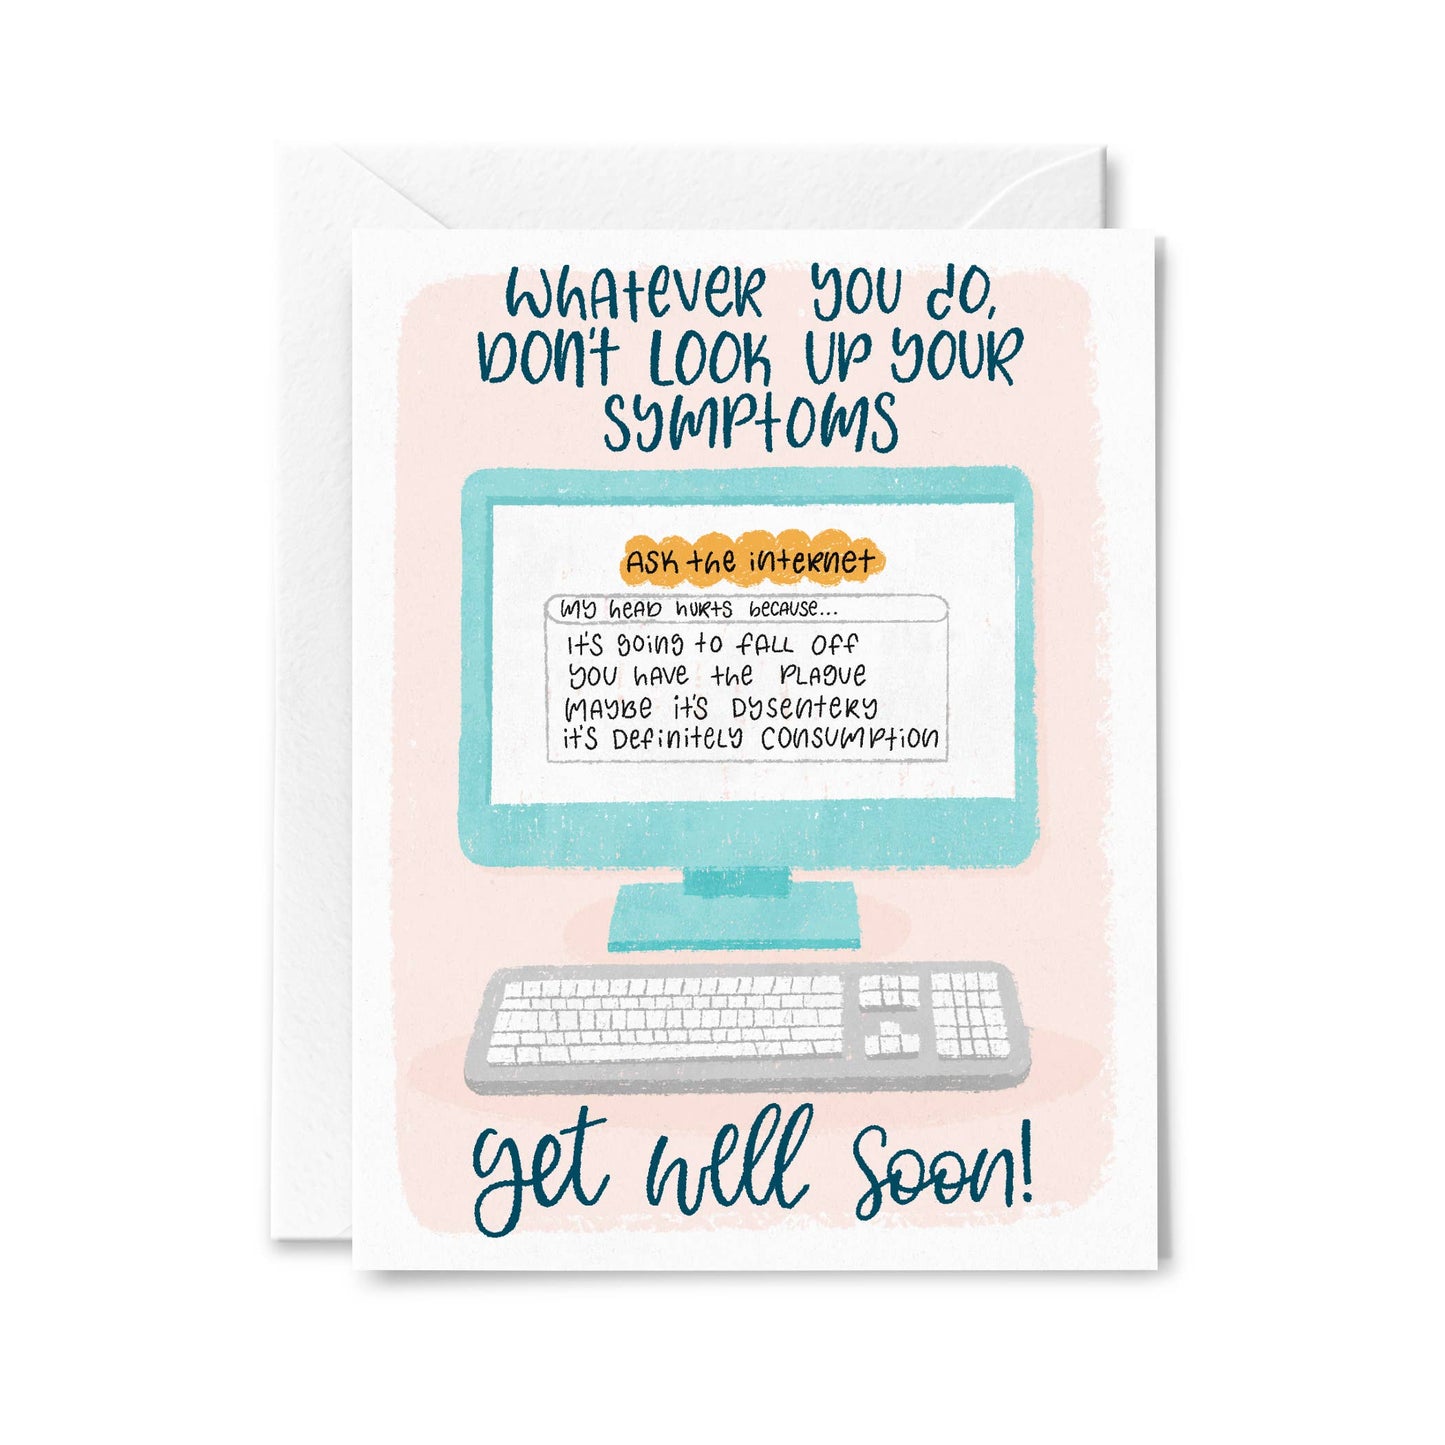 Don't Look Up Your Symptoms | Funny Get Well Card